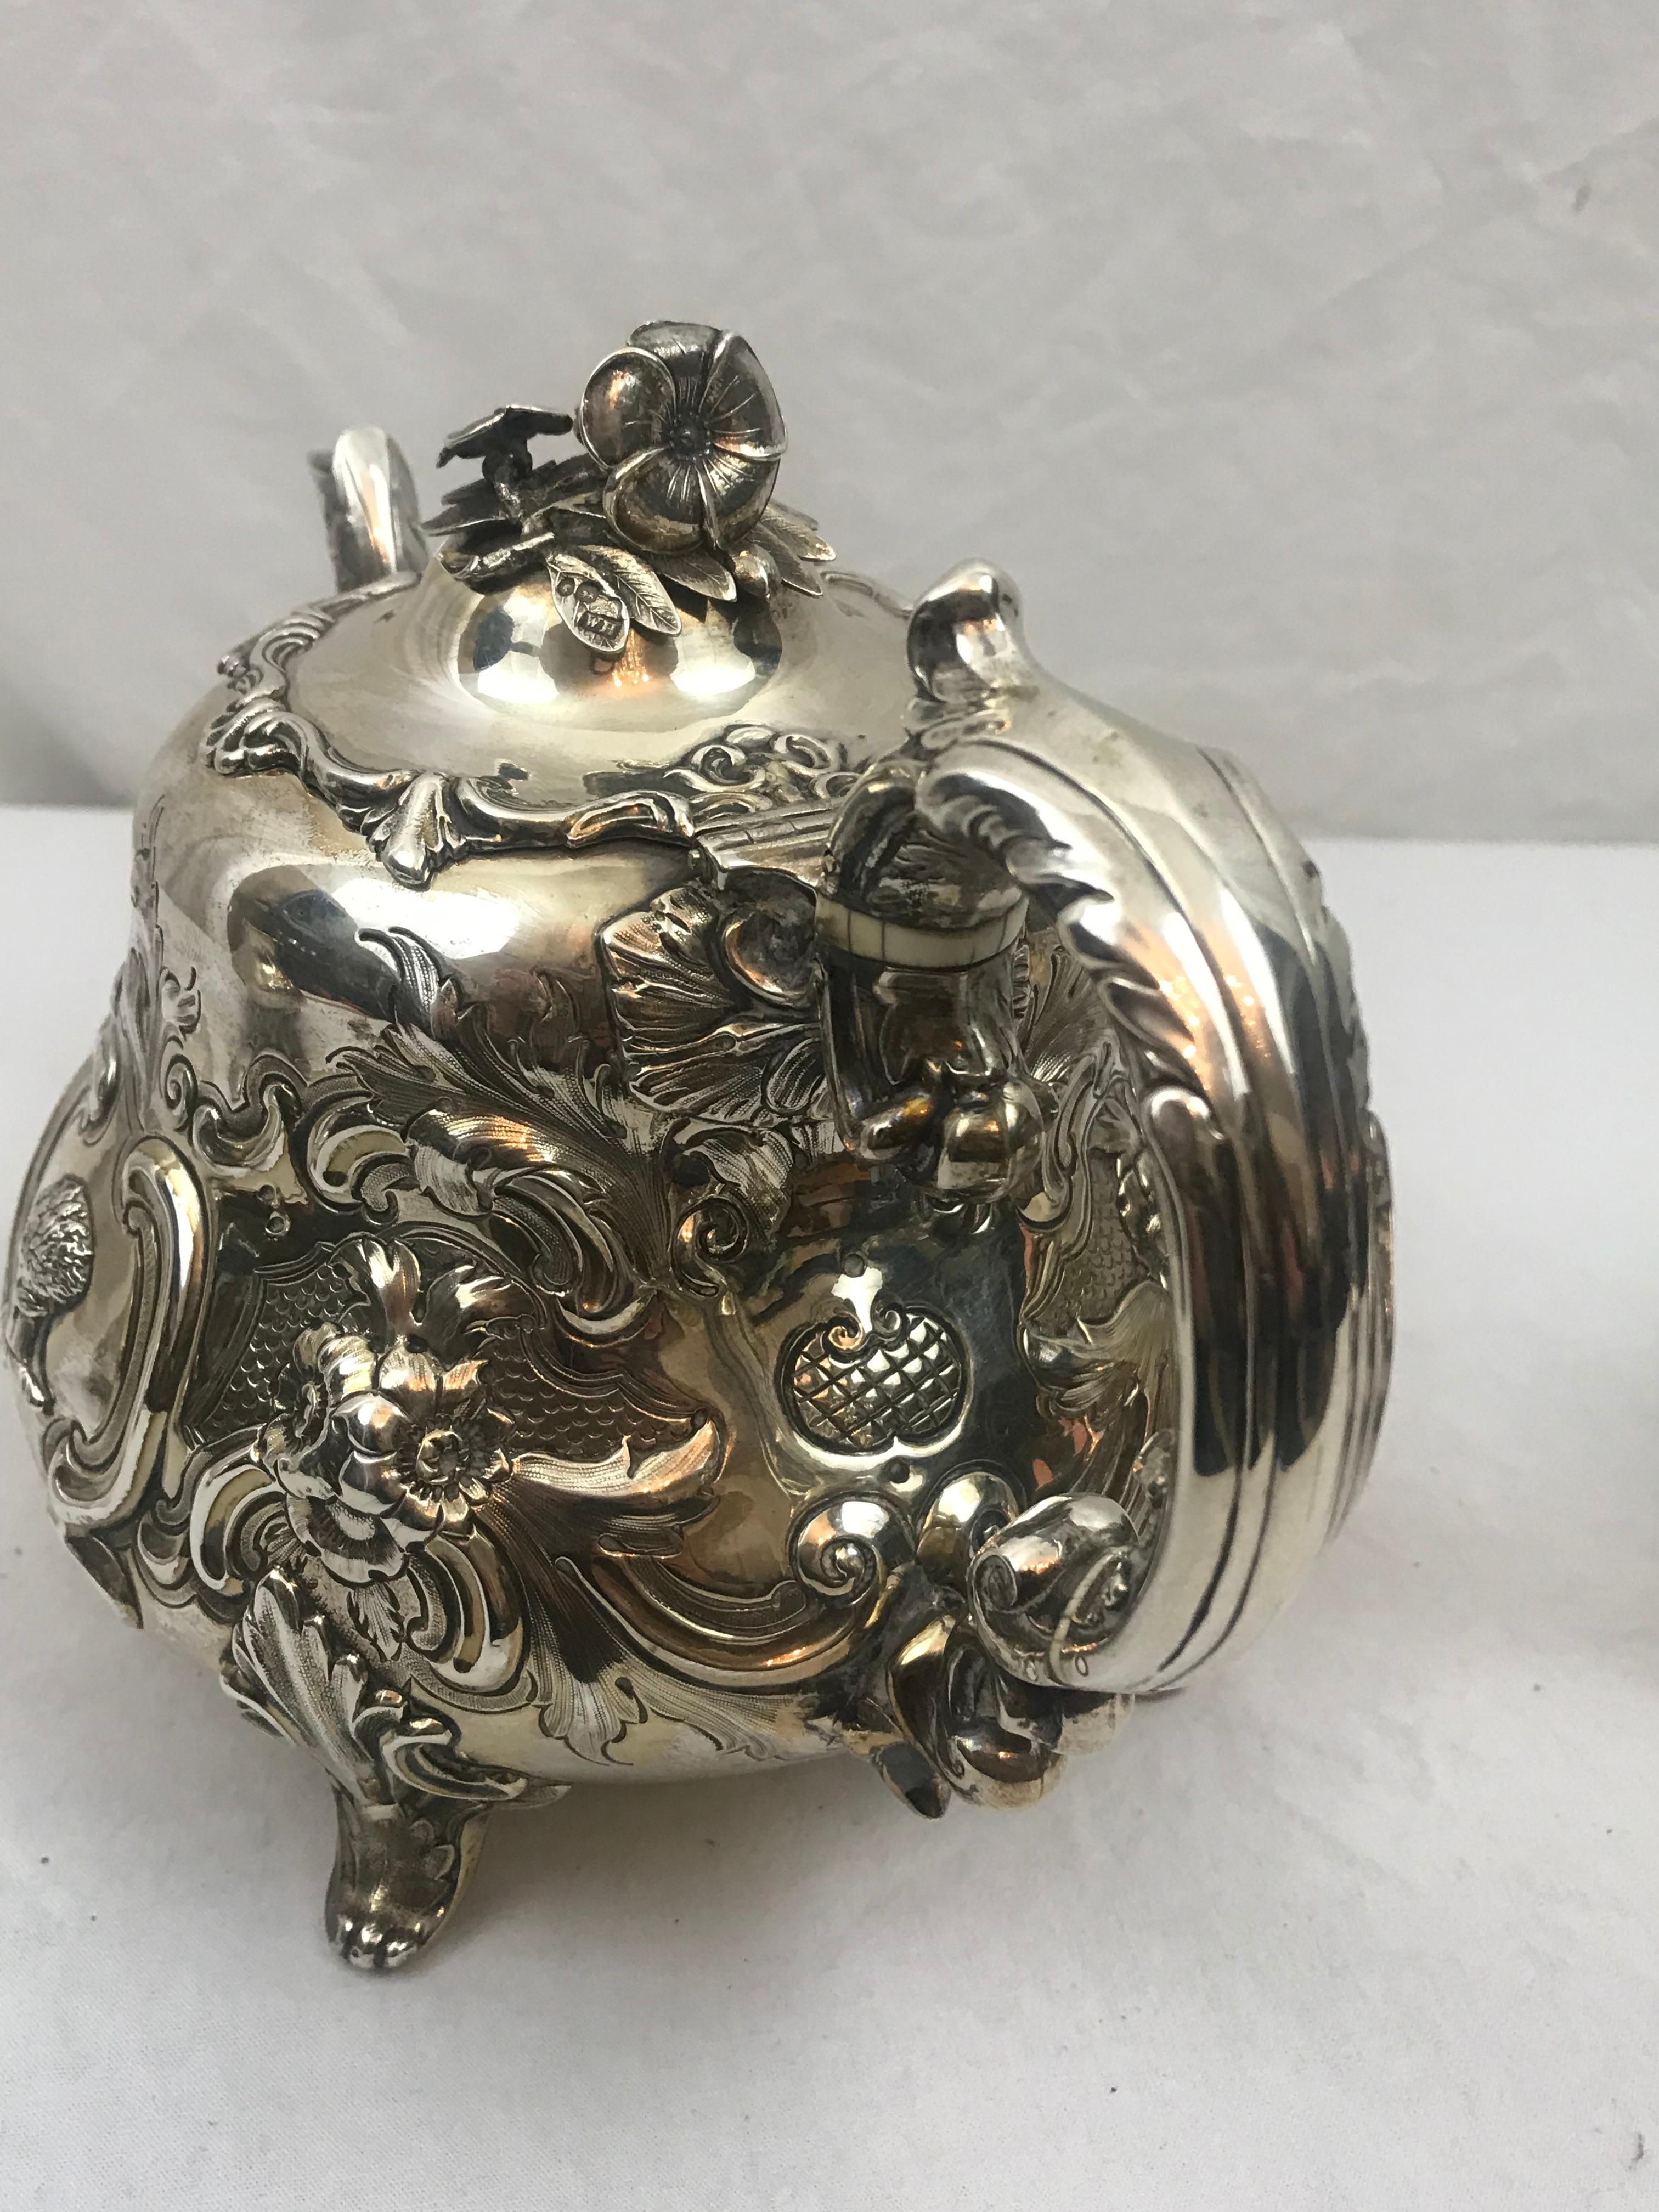 British Victorian English Sterling Silver Repousse Teapot, London 1855, William Hunter